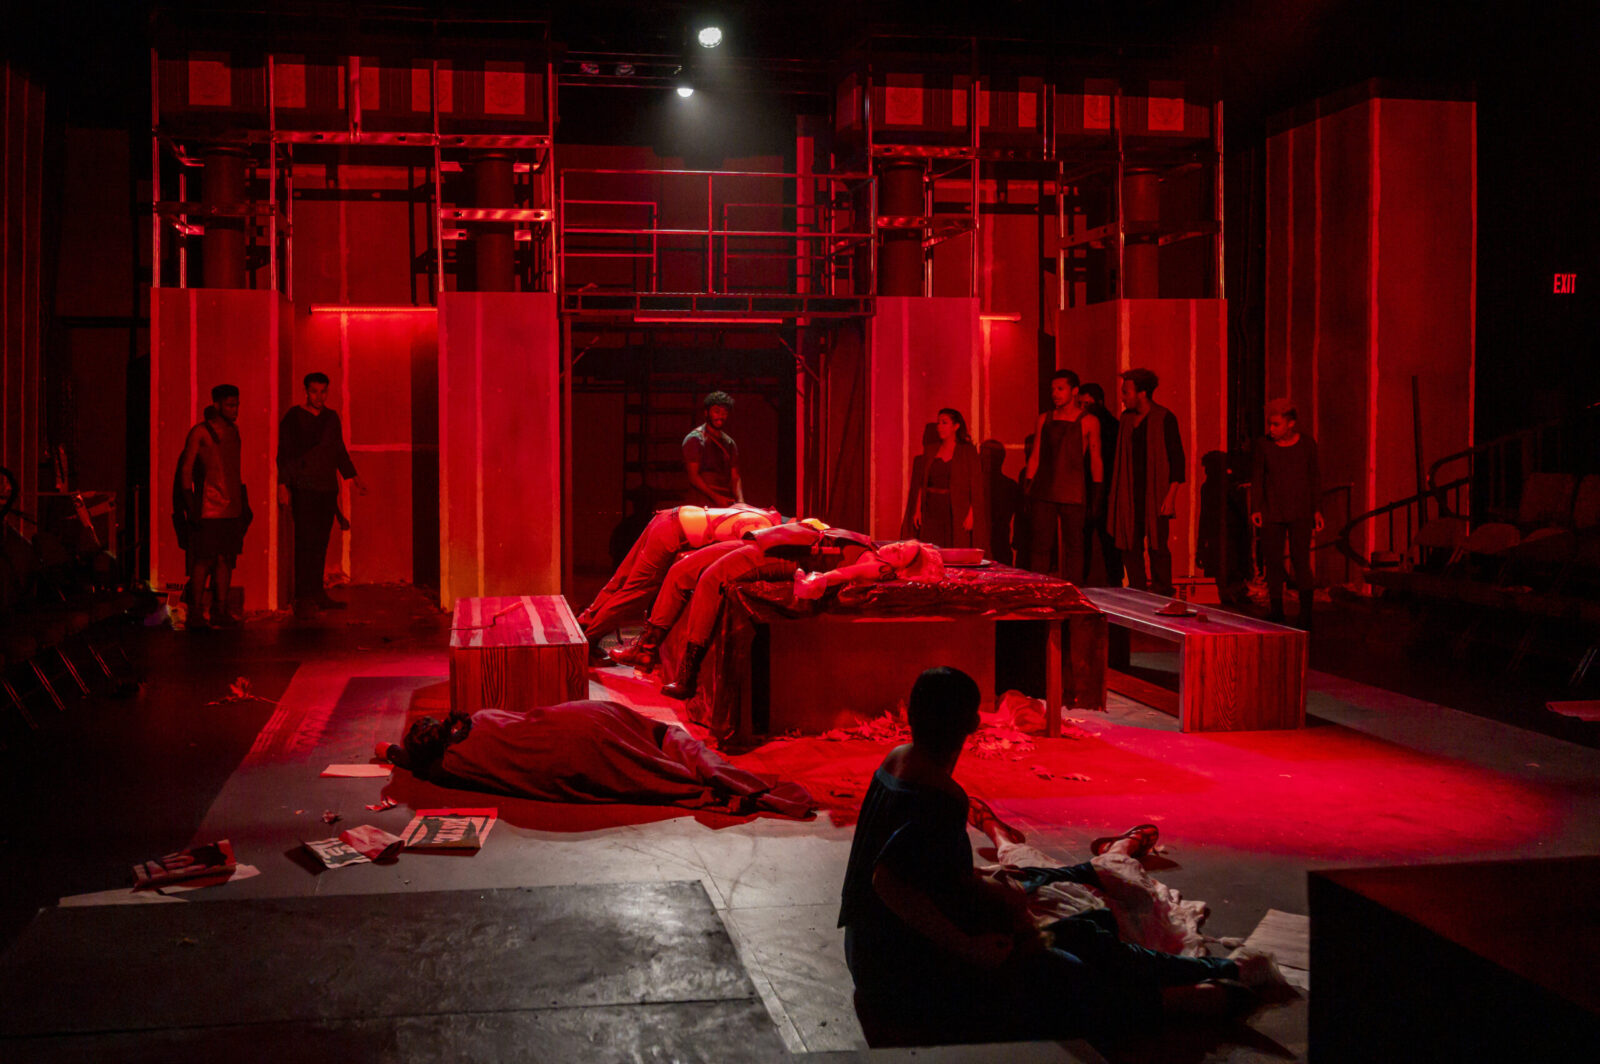 Stage lit in red as character dies